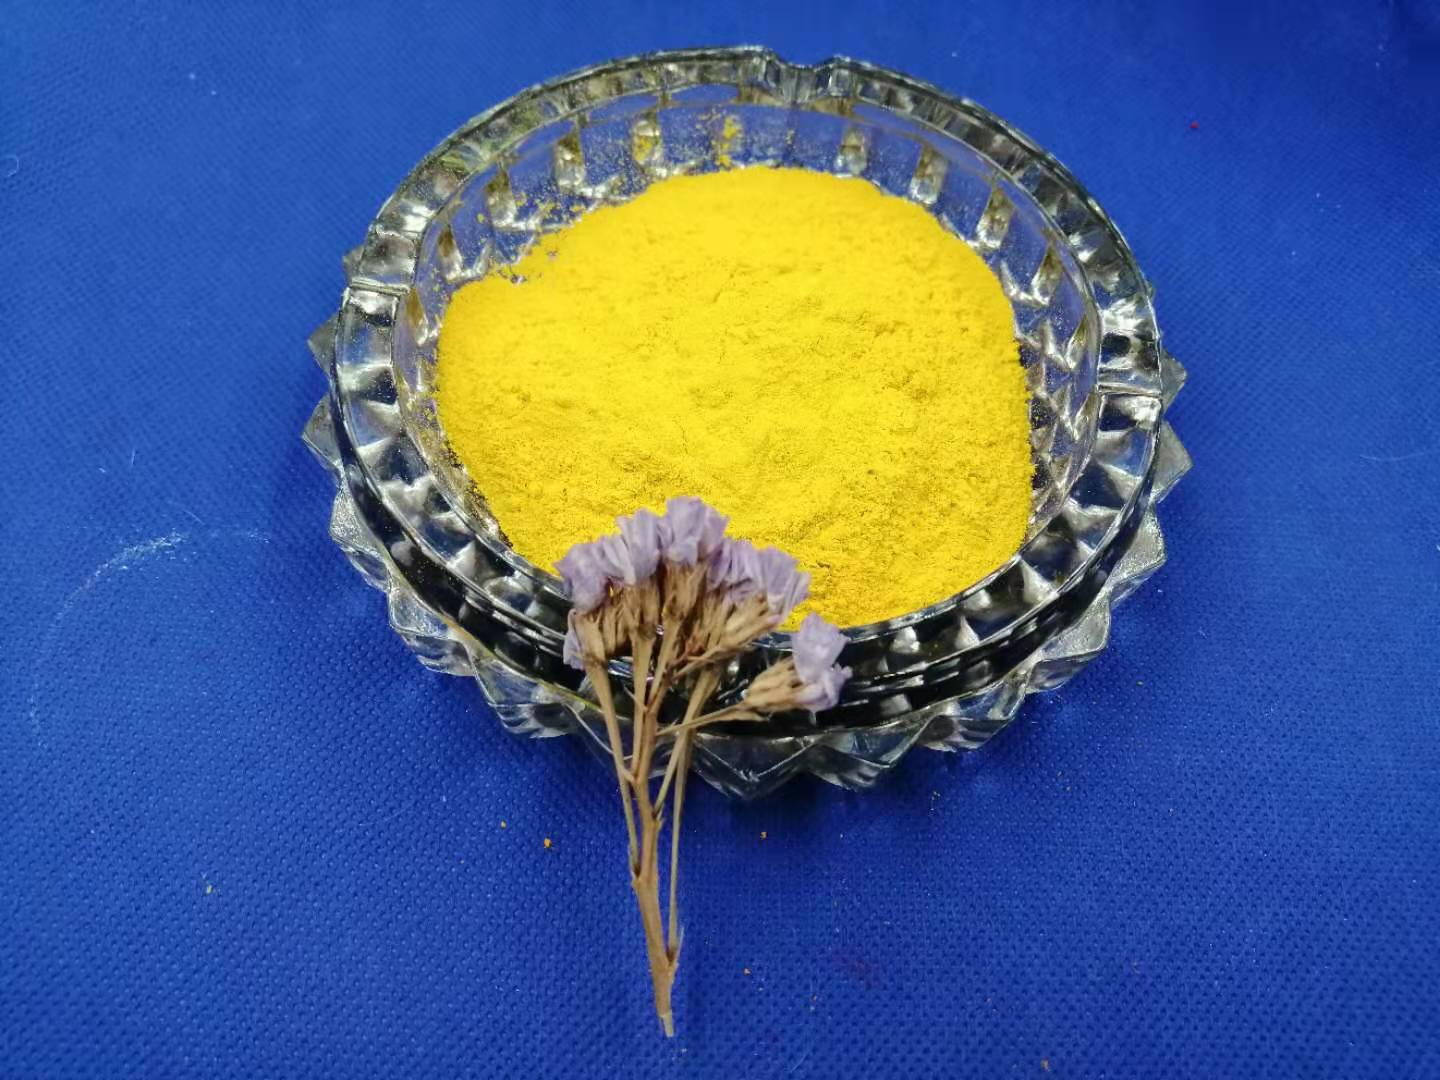 Pigment Yellow 120 For Powder Coating And Automotive Car Excellent Dispersion With High Sun Resistance And High Heat Resistance 100% Purity